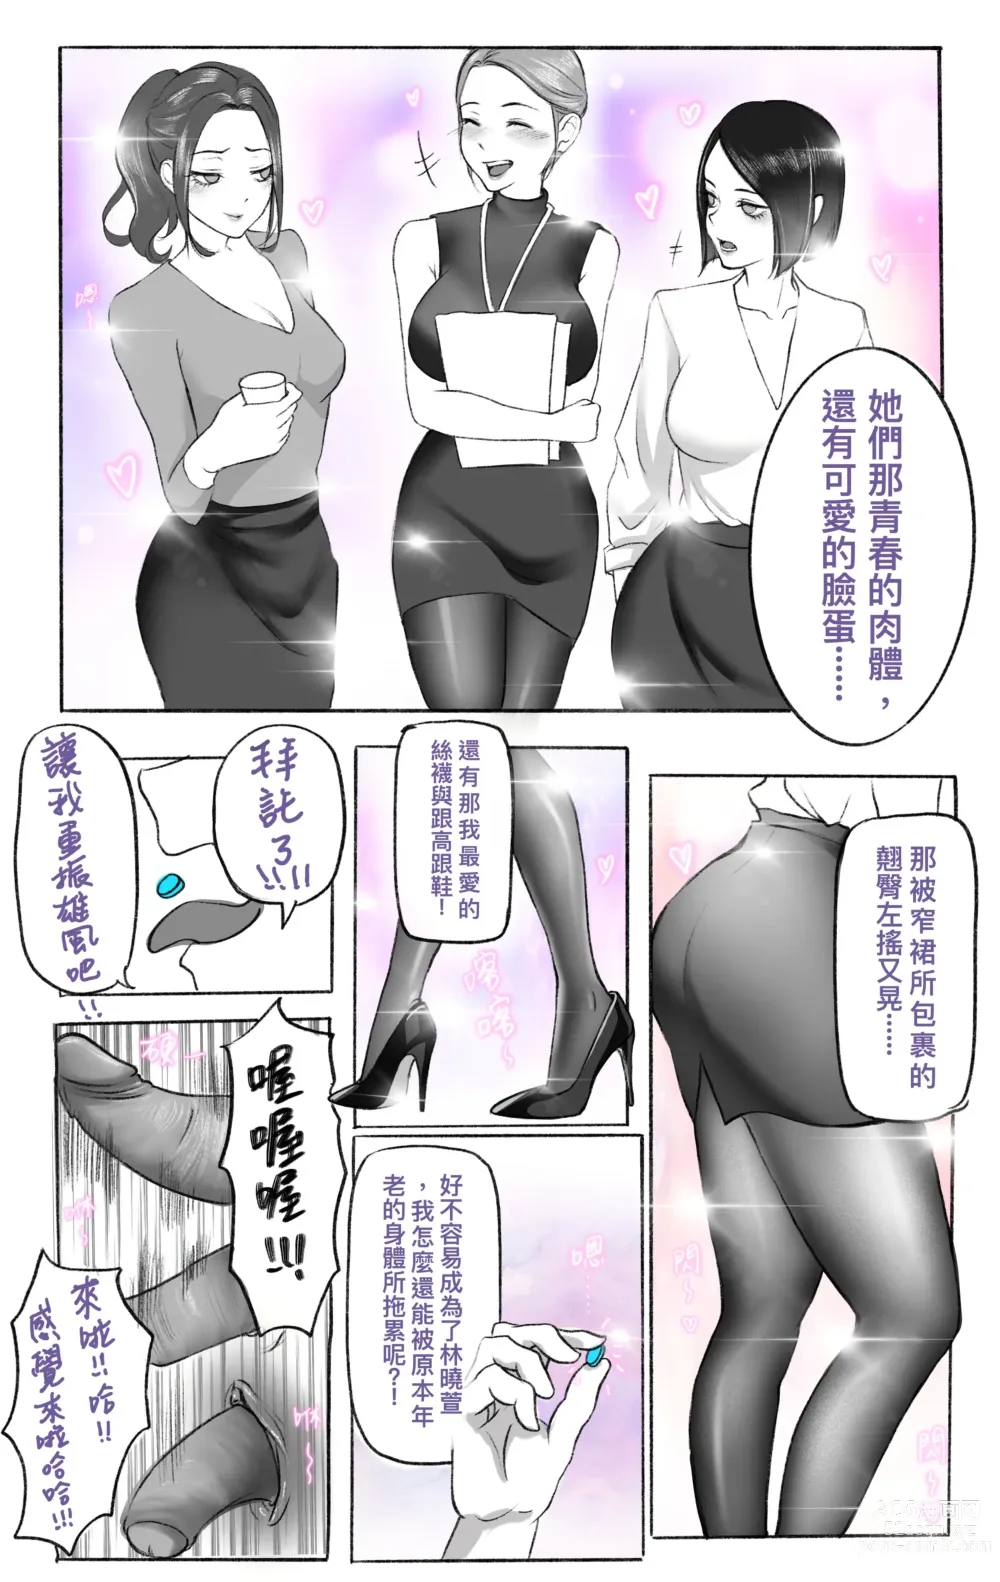 Page 2 of doujinshi 主管的秘密03